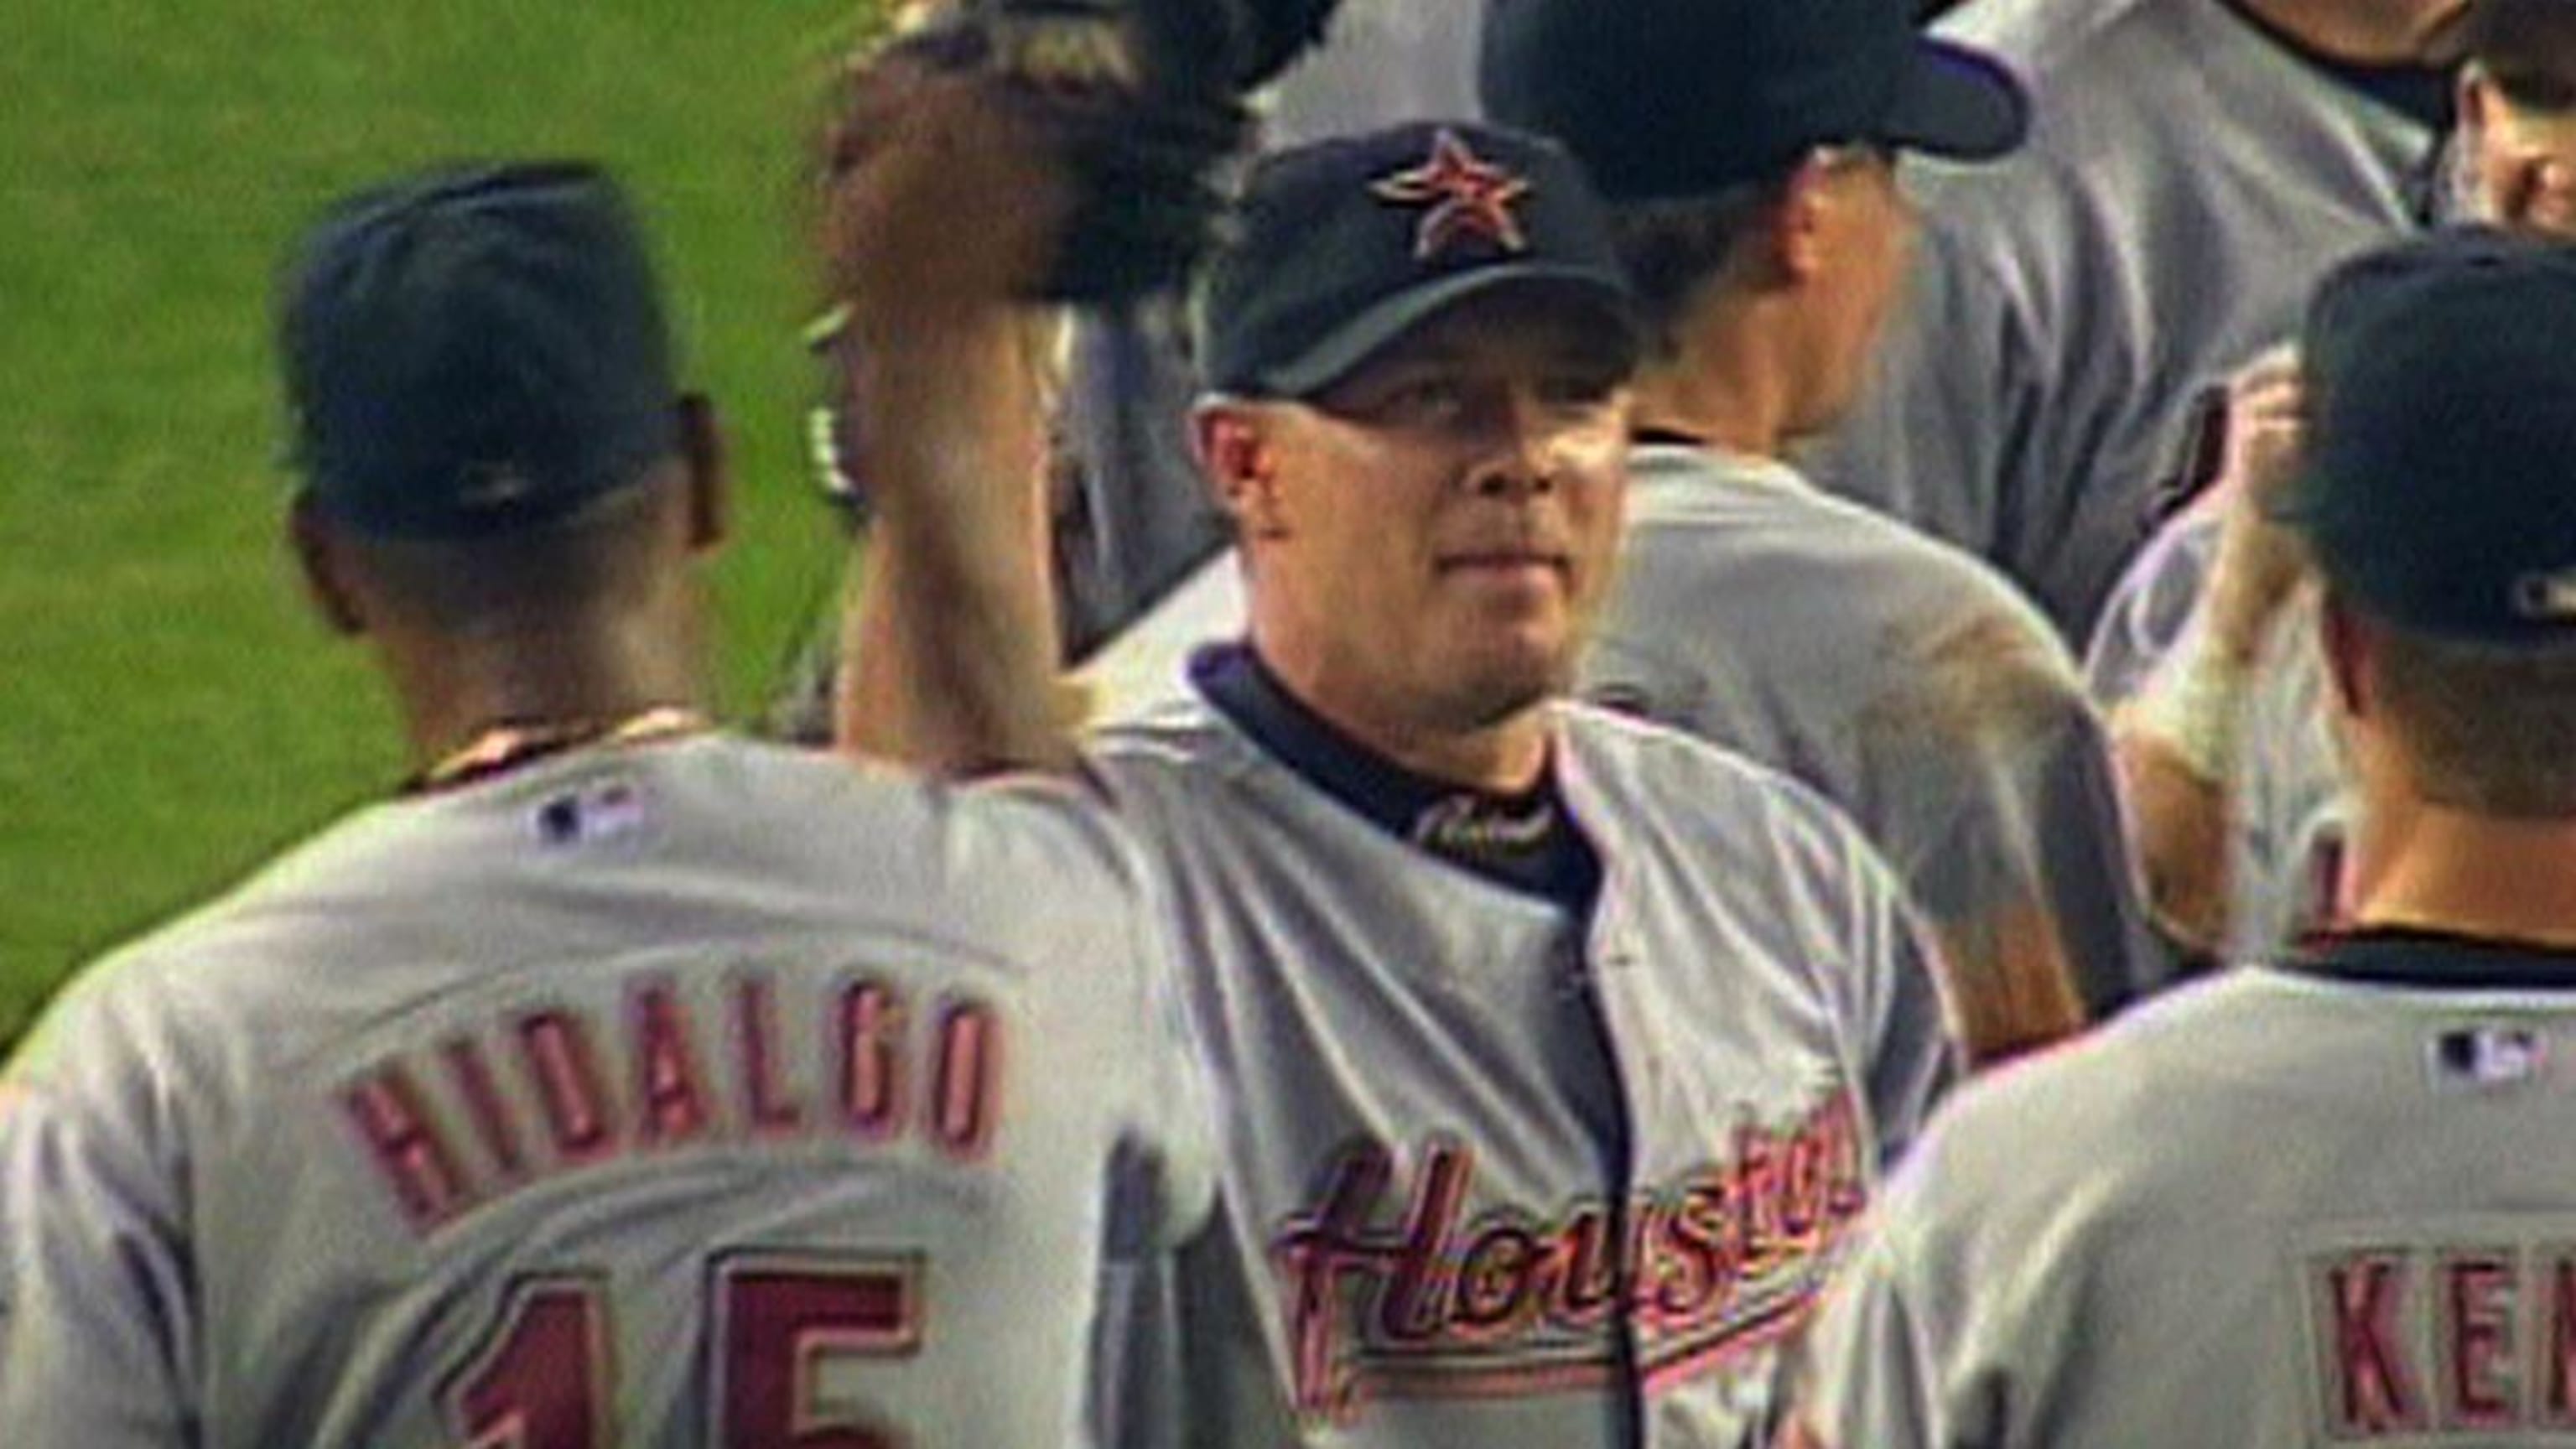 All-Star closer Billy Wagner: I've watched so many Hall of Fame